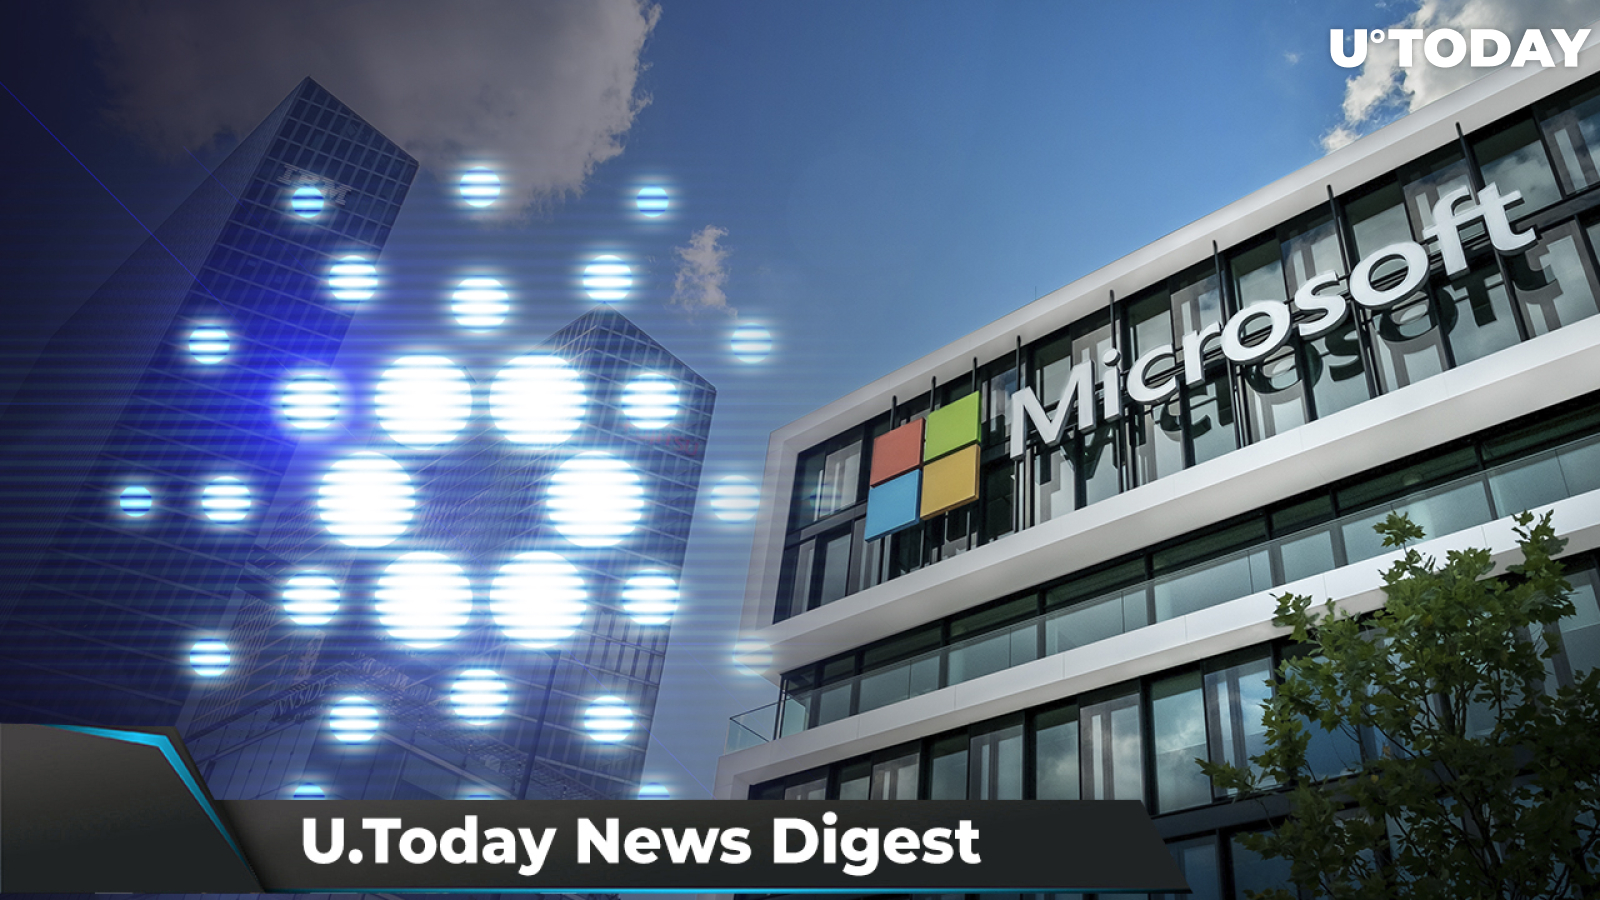 Microsoft’s Tweet Stirs Up SHIB Army, Cardano Outpaces BTC and ETH in Transaction Volume, Ripple Is Now Member of DEA: Crypto News Digest by U.Today